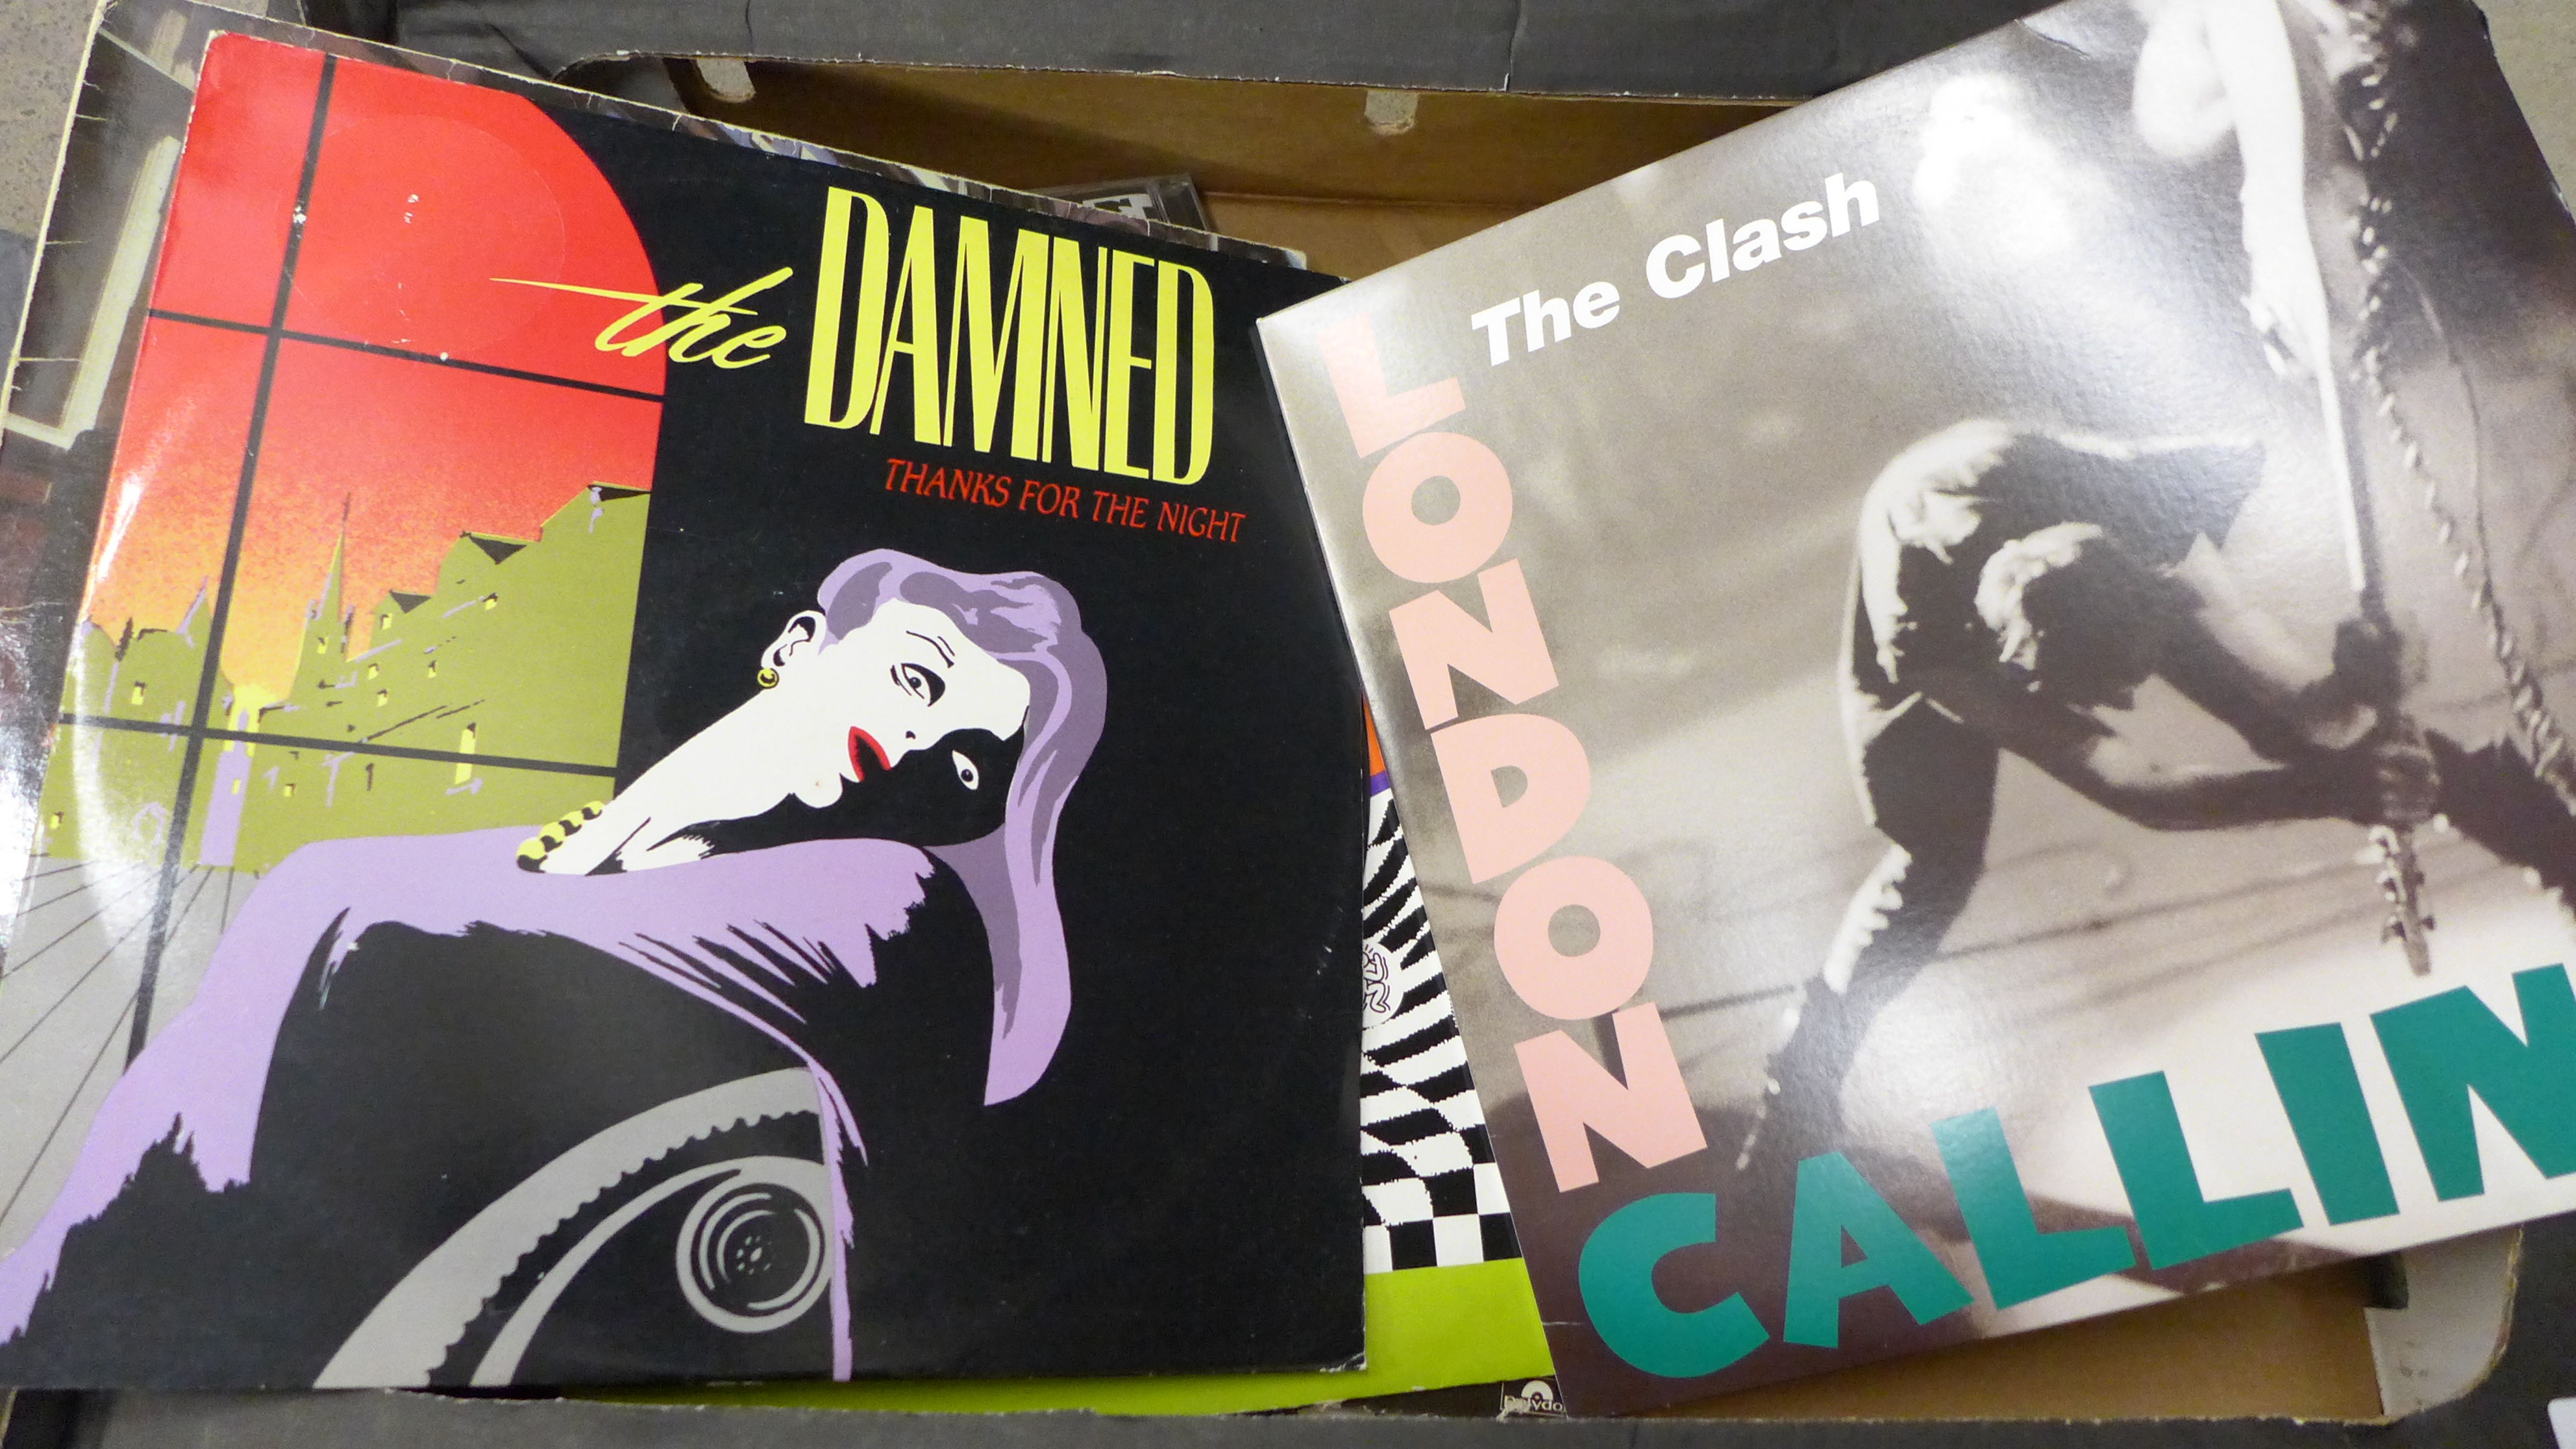 1970s/80s alternative music LP records and CDs, The Clash, Specials, The Jam, The Damned, Madness, - Image 4 of 4